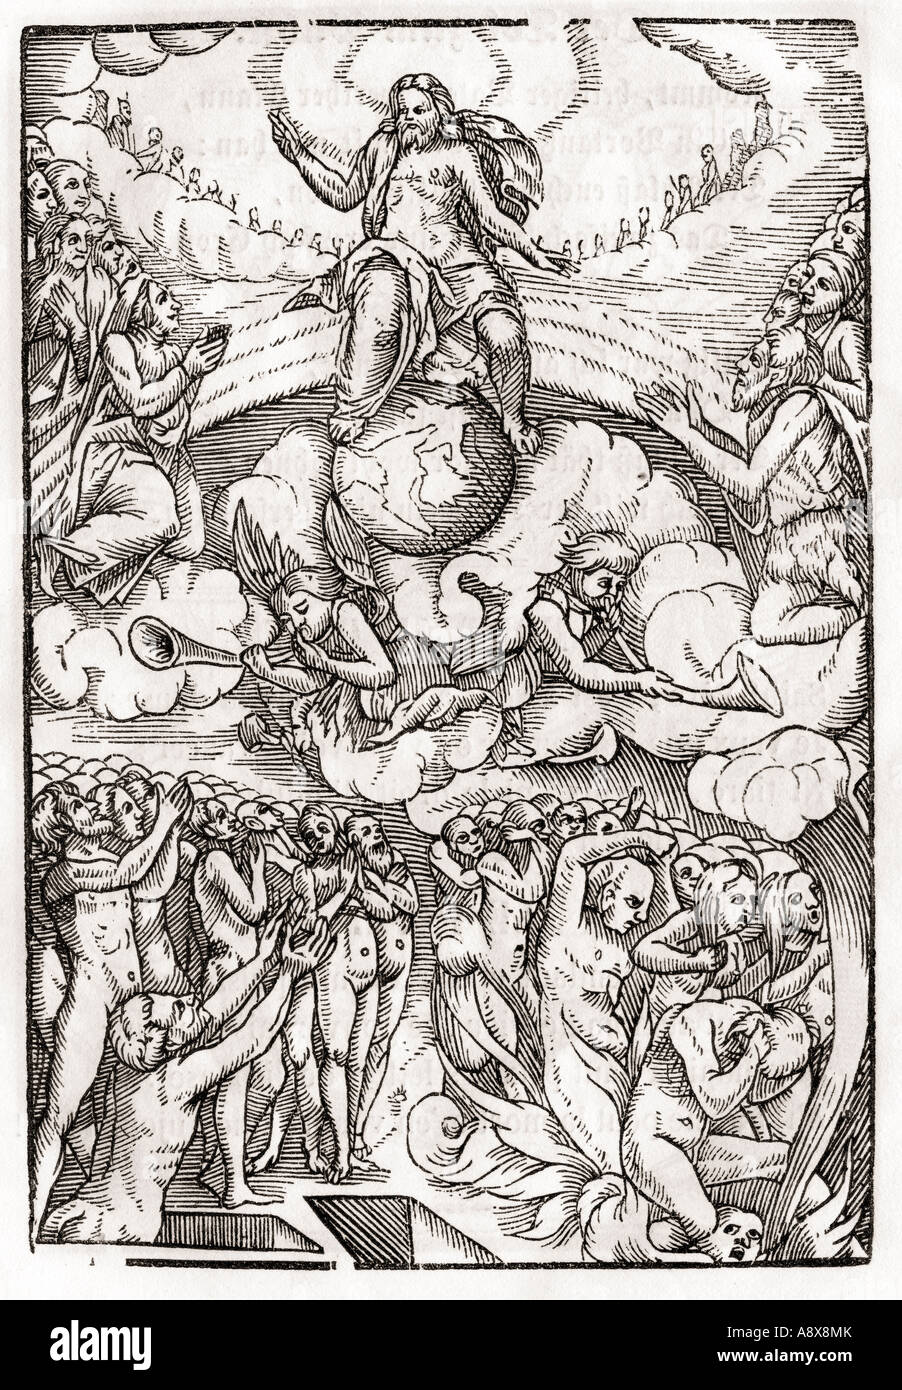 The Last Judgement loosely based on Hans Holbein the Younger. From Der Todten Tanz or The Dance of Death, published Basel, 1843. Stock Photo